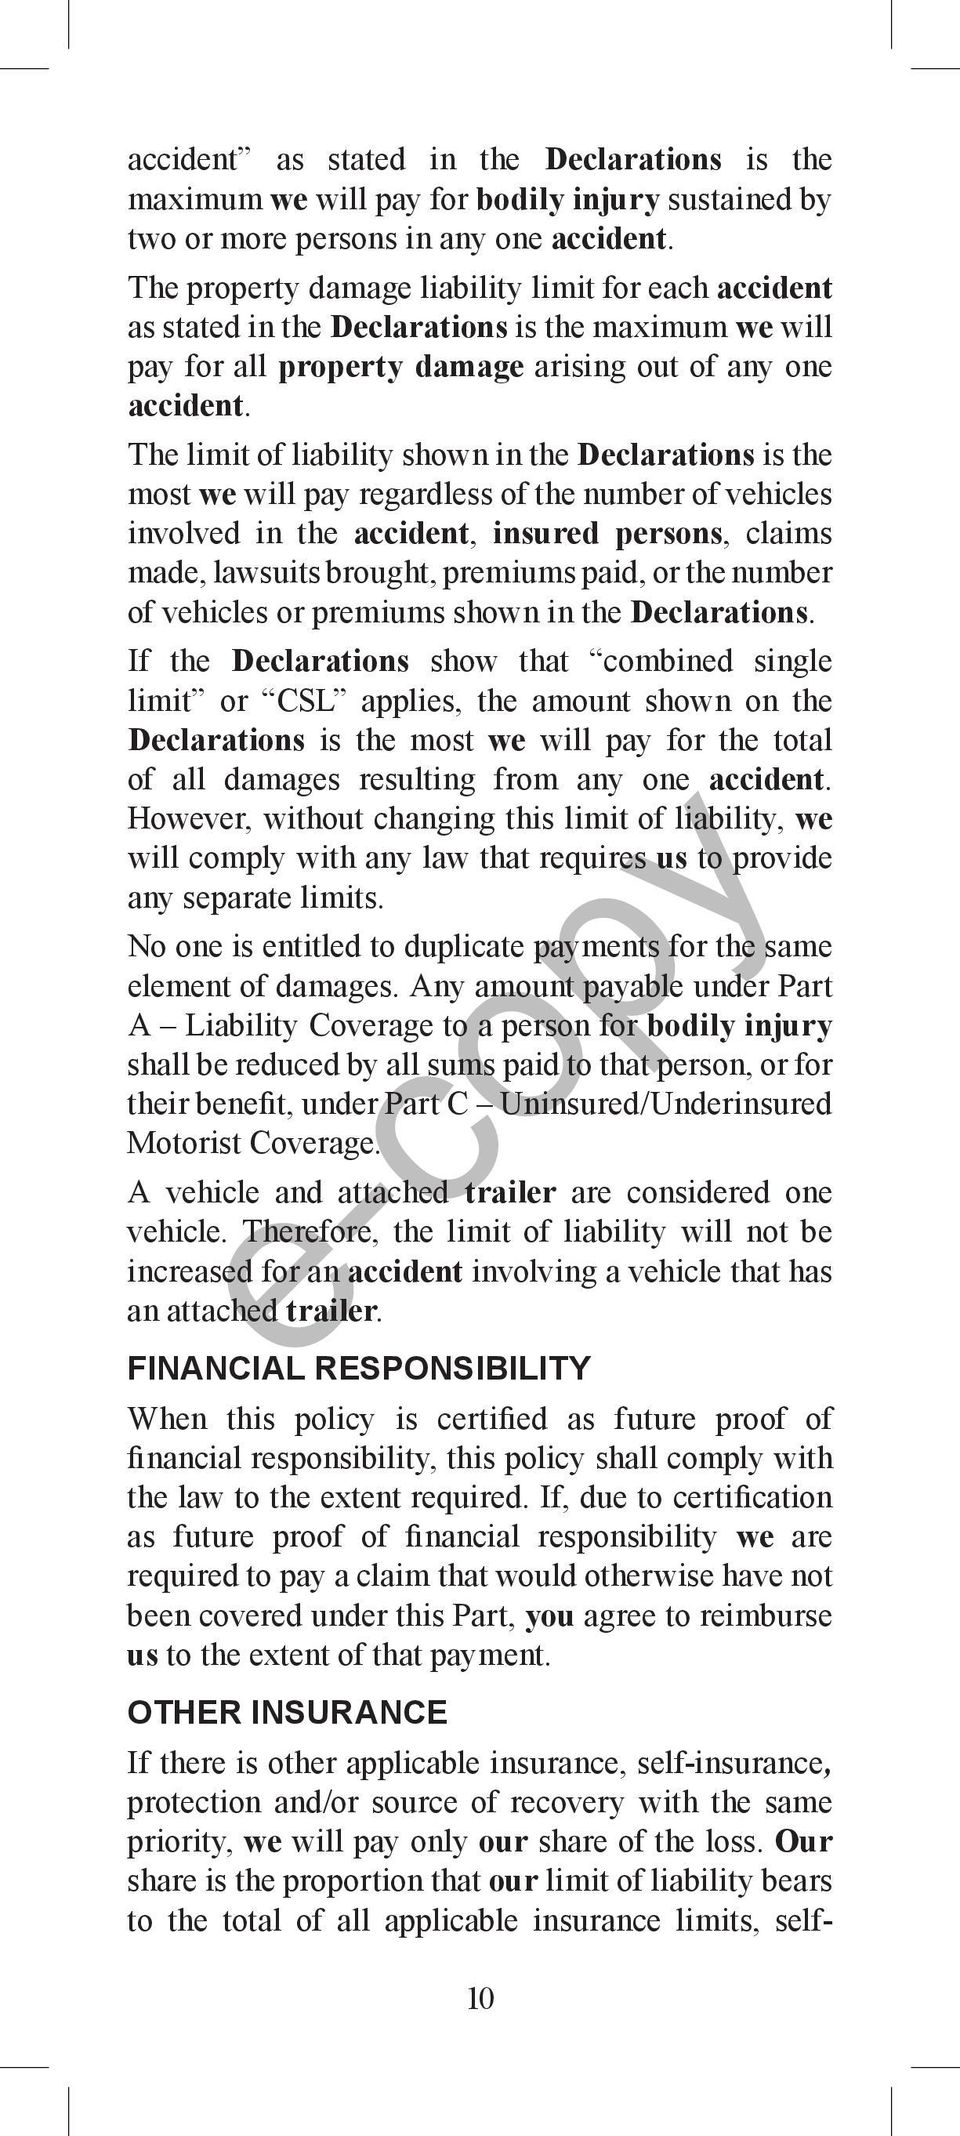 The limit of liability shown in the Declarations is the most we will pay regardless of the number of vehicles involved in the accident, insured persons, claims made, lawsuits brought, premiums paid,